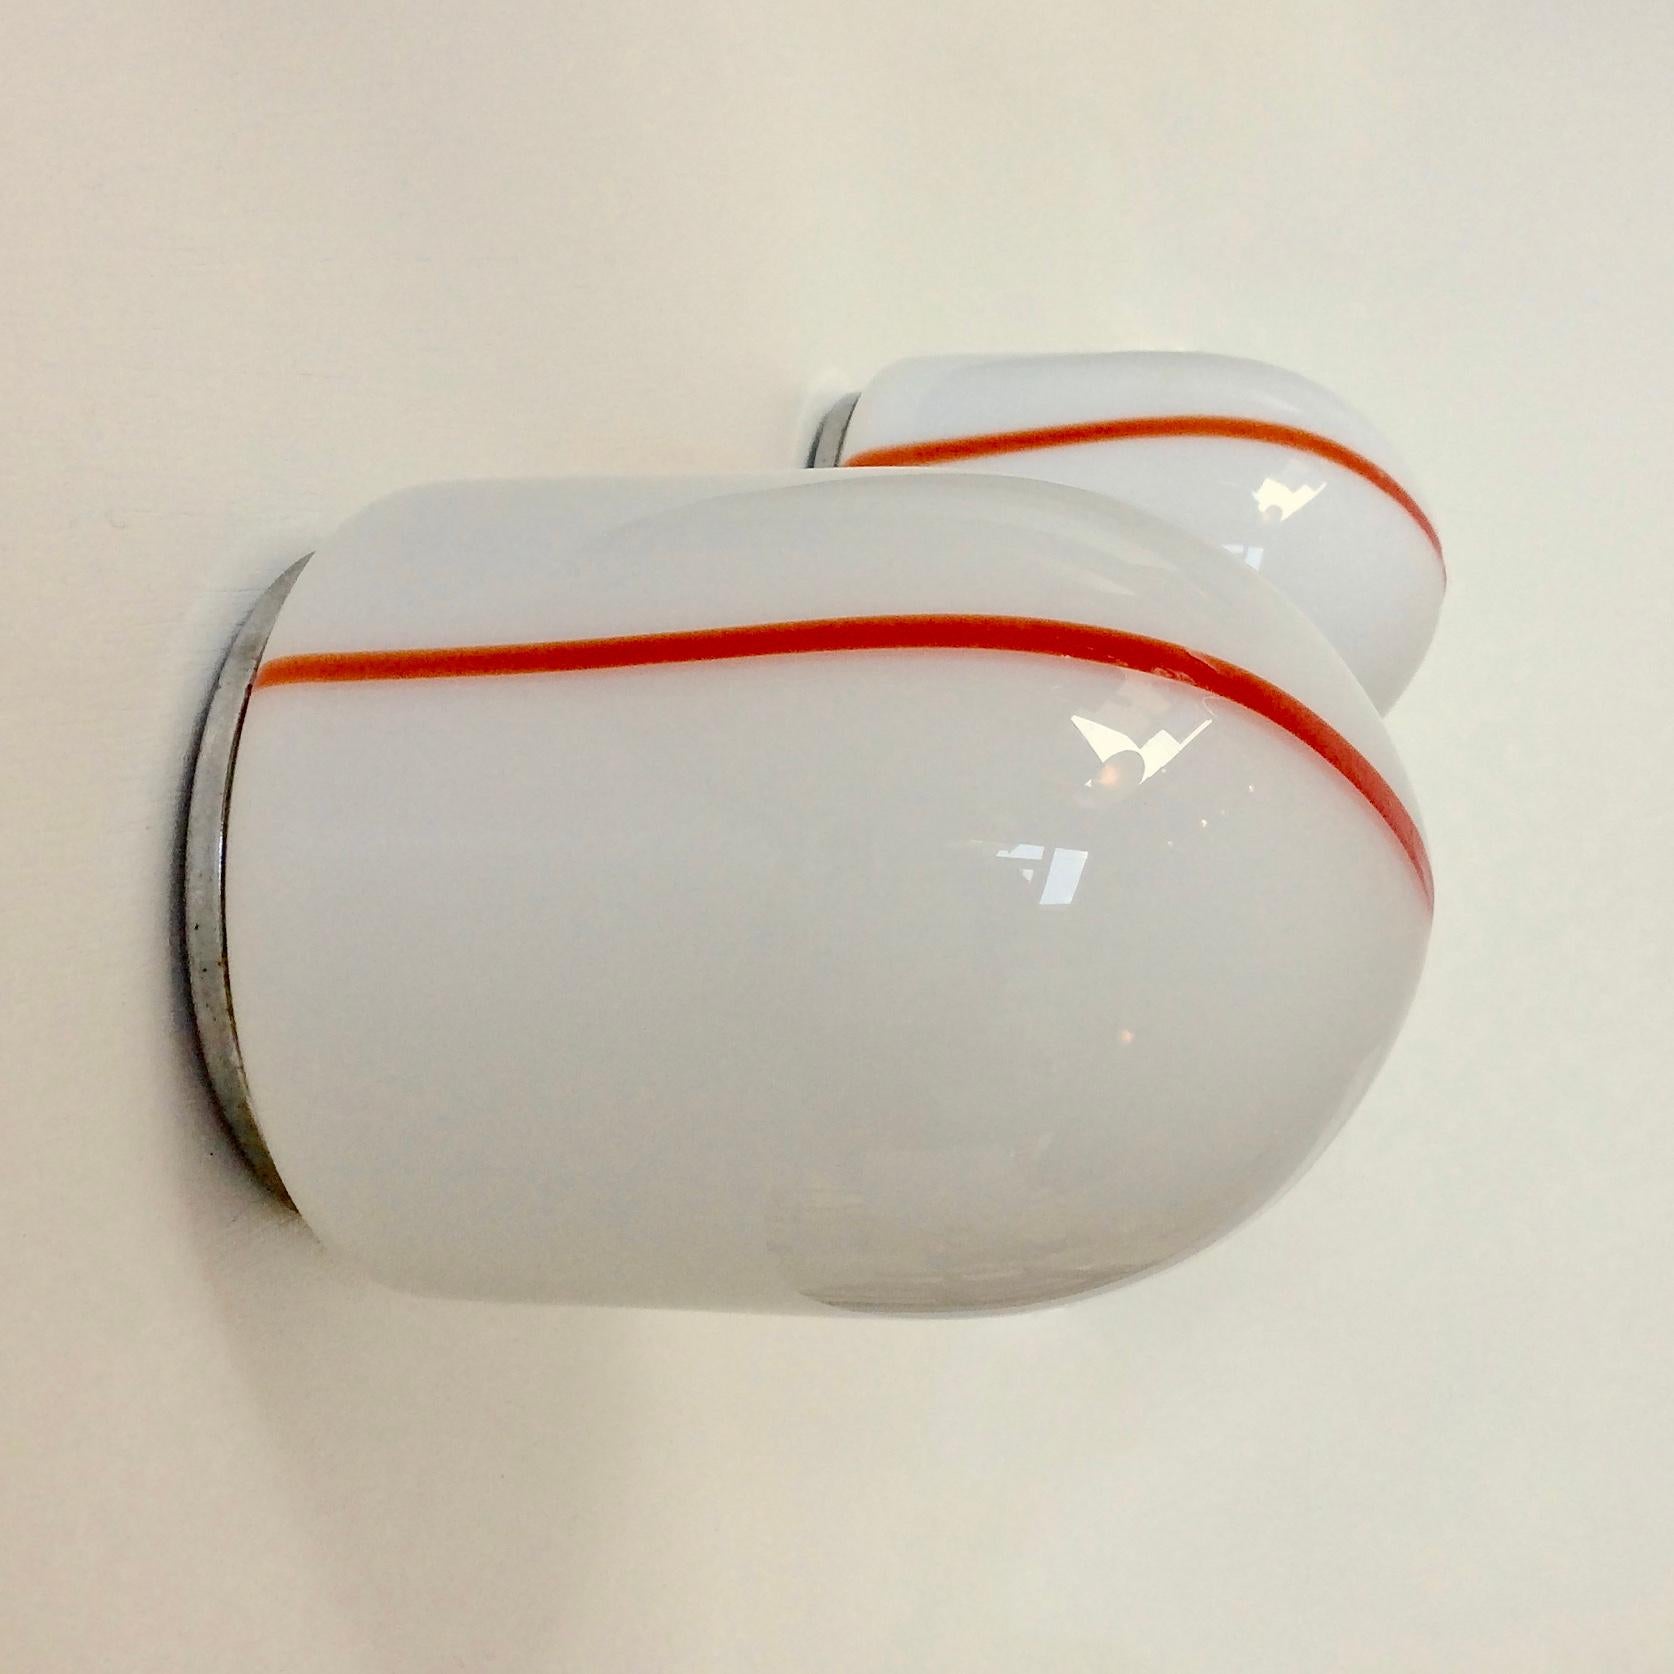 Nice Murano pair of sconces, Din Linea model, Renato Toso for Leucos, circa 1972, Italy.
White Murano glass with red line, round metal base.
One E27 bulb of 40W.
Dimensions: 14 cm deep, 11 cm diameter.
All purchases are covered by our Buyer